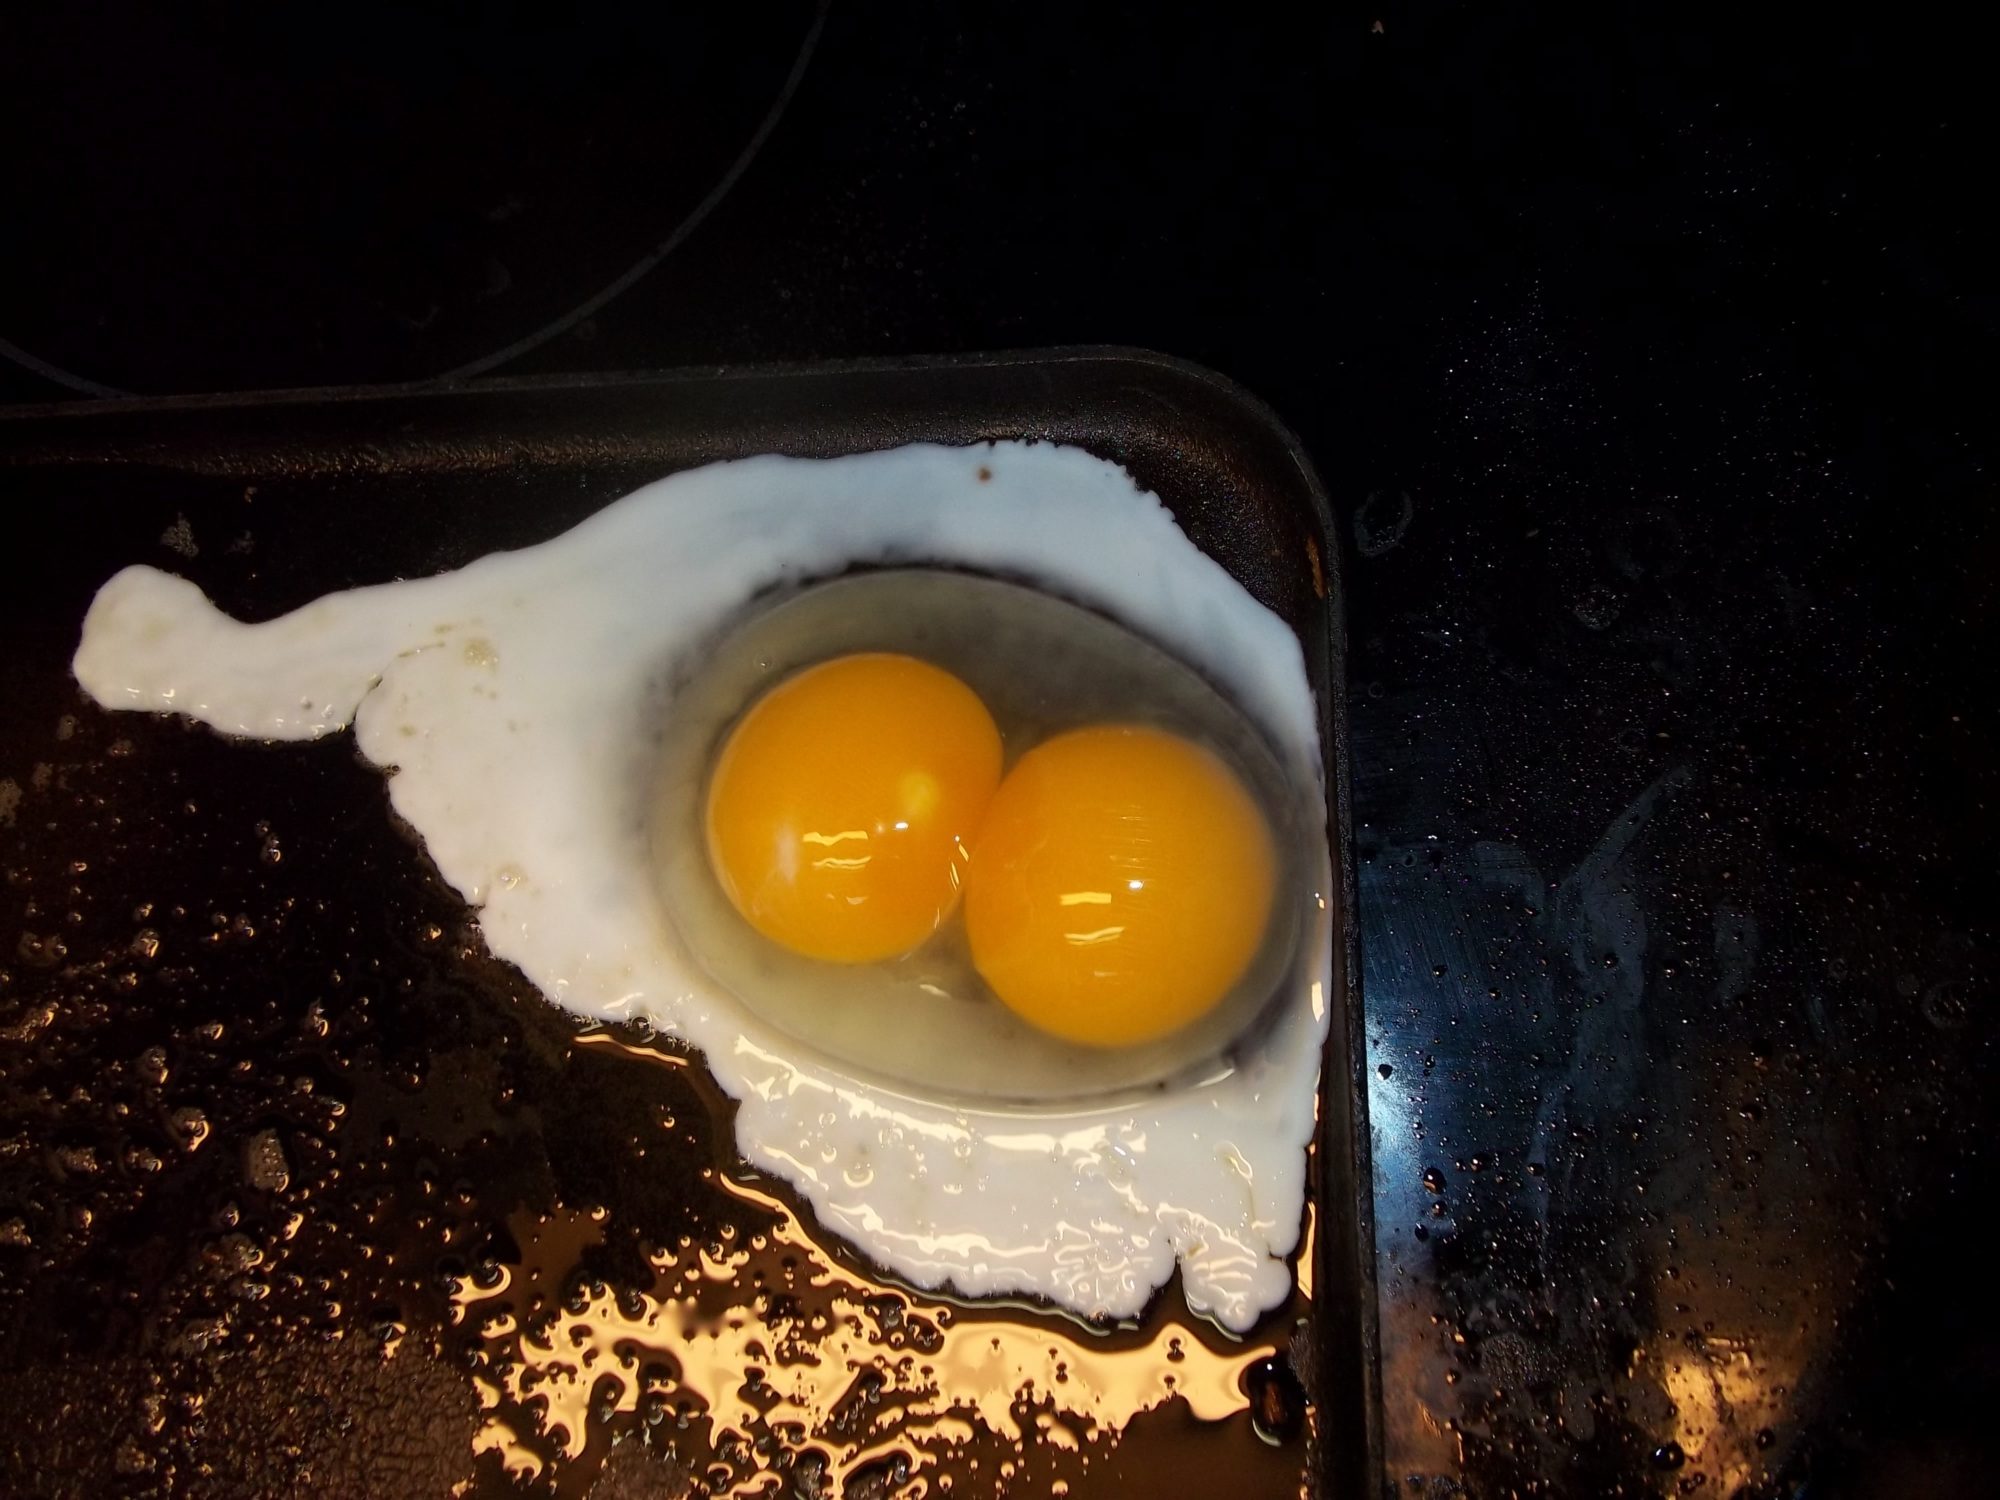 A double yolker! Our first.